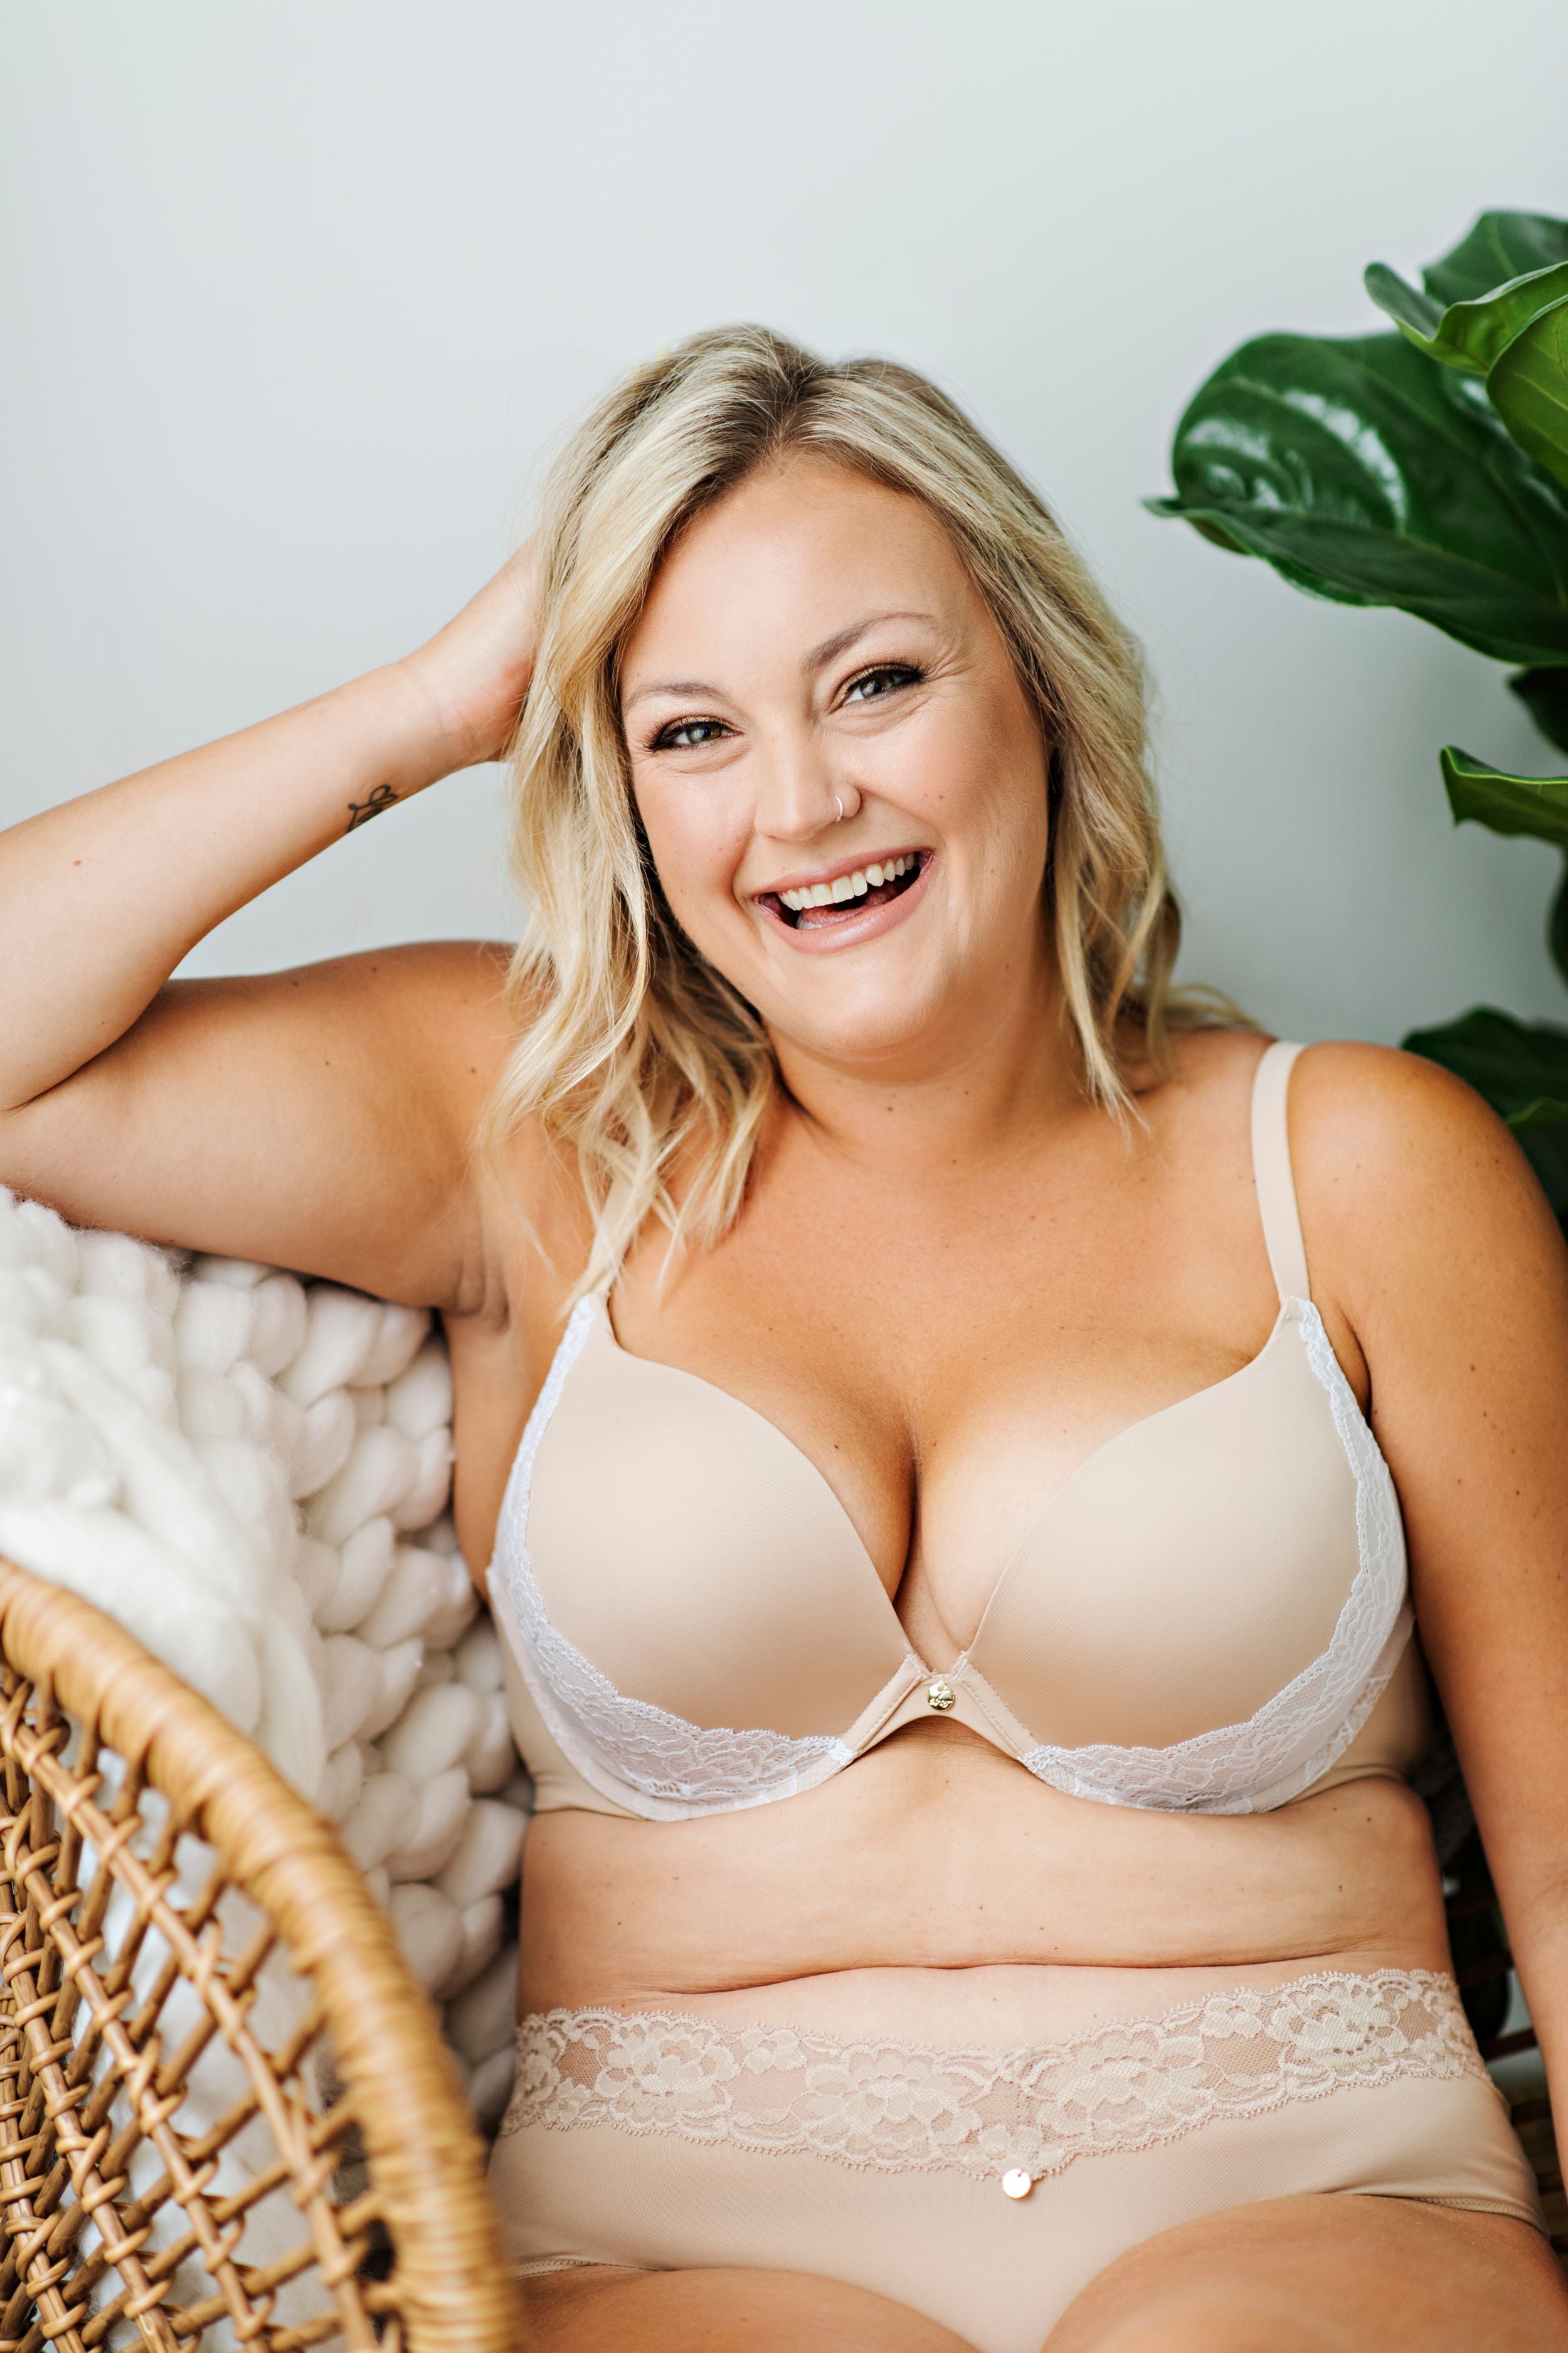 Piper Ultimate Push-Up Plunge Convertible Bra